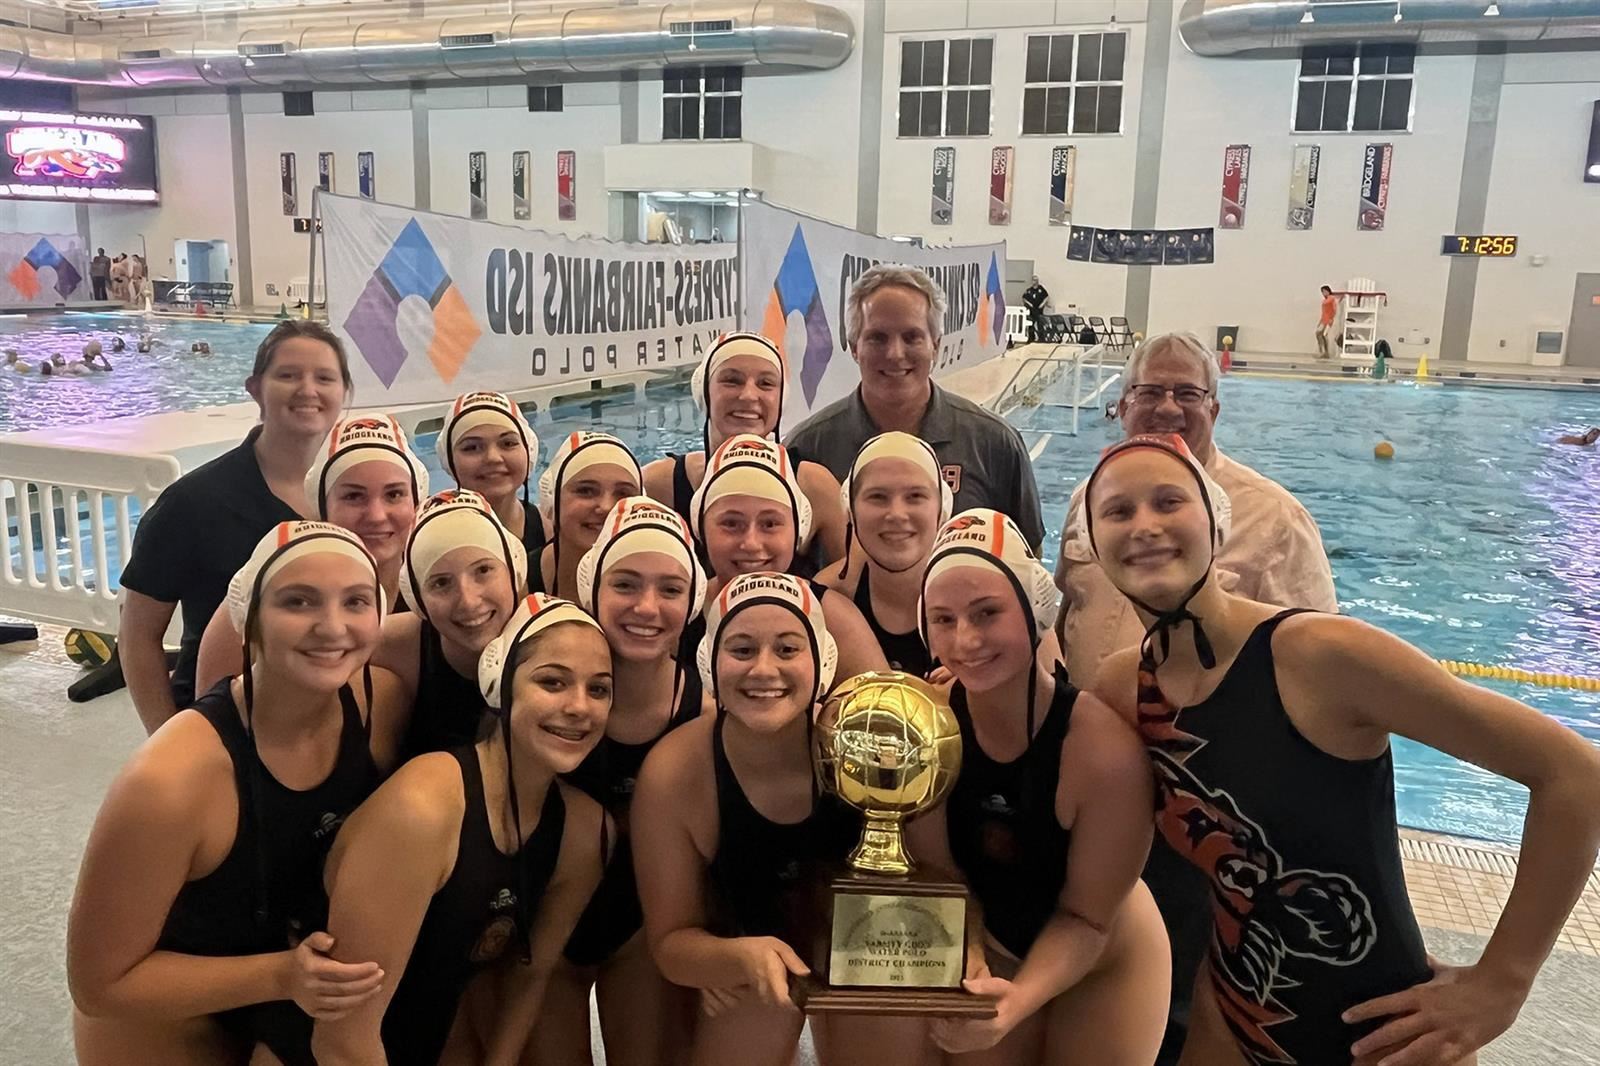 The Bridgeland High School girls’ water polo team won the District 16-6A Championship. The Bears posted a 10-0 record.